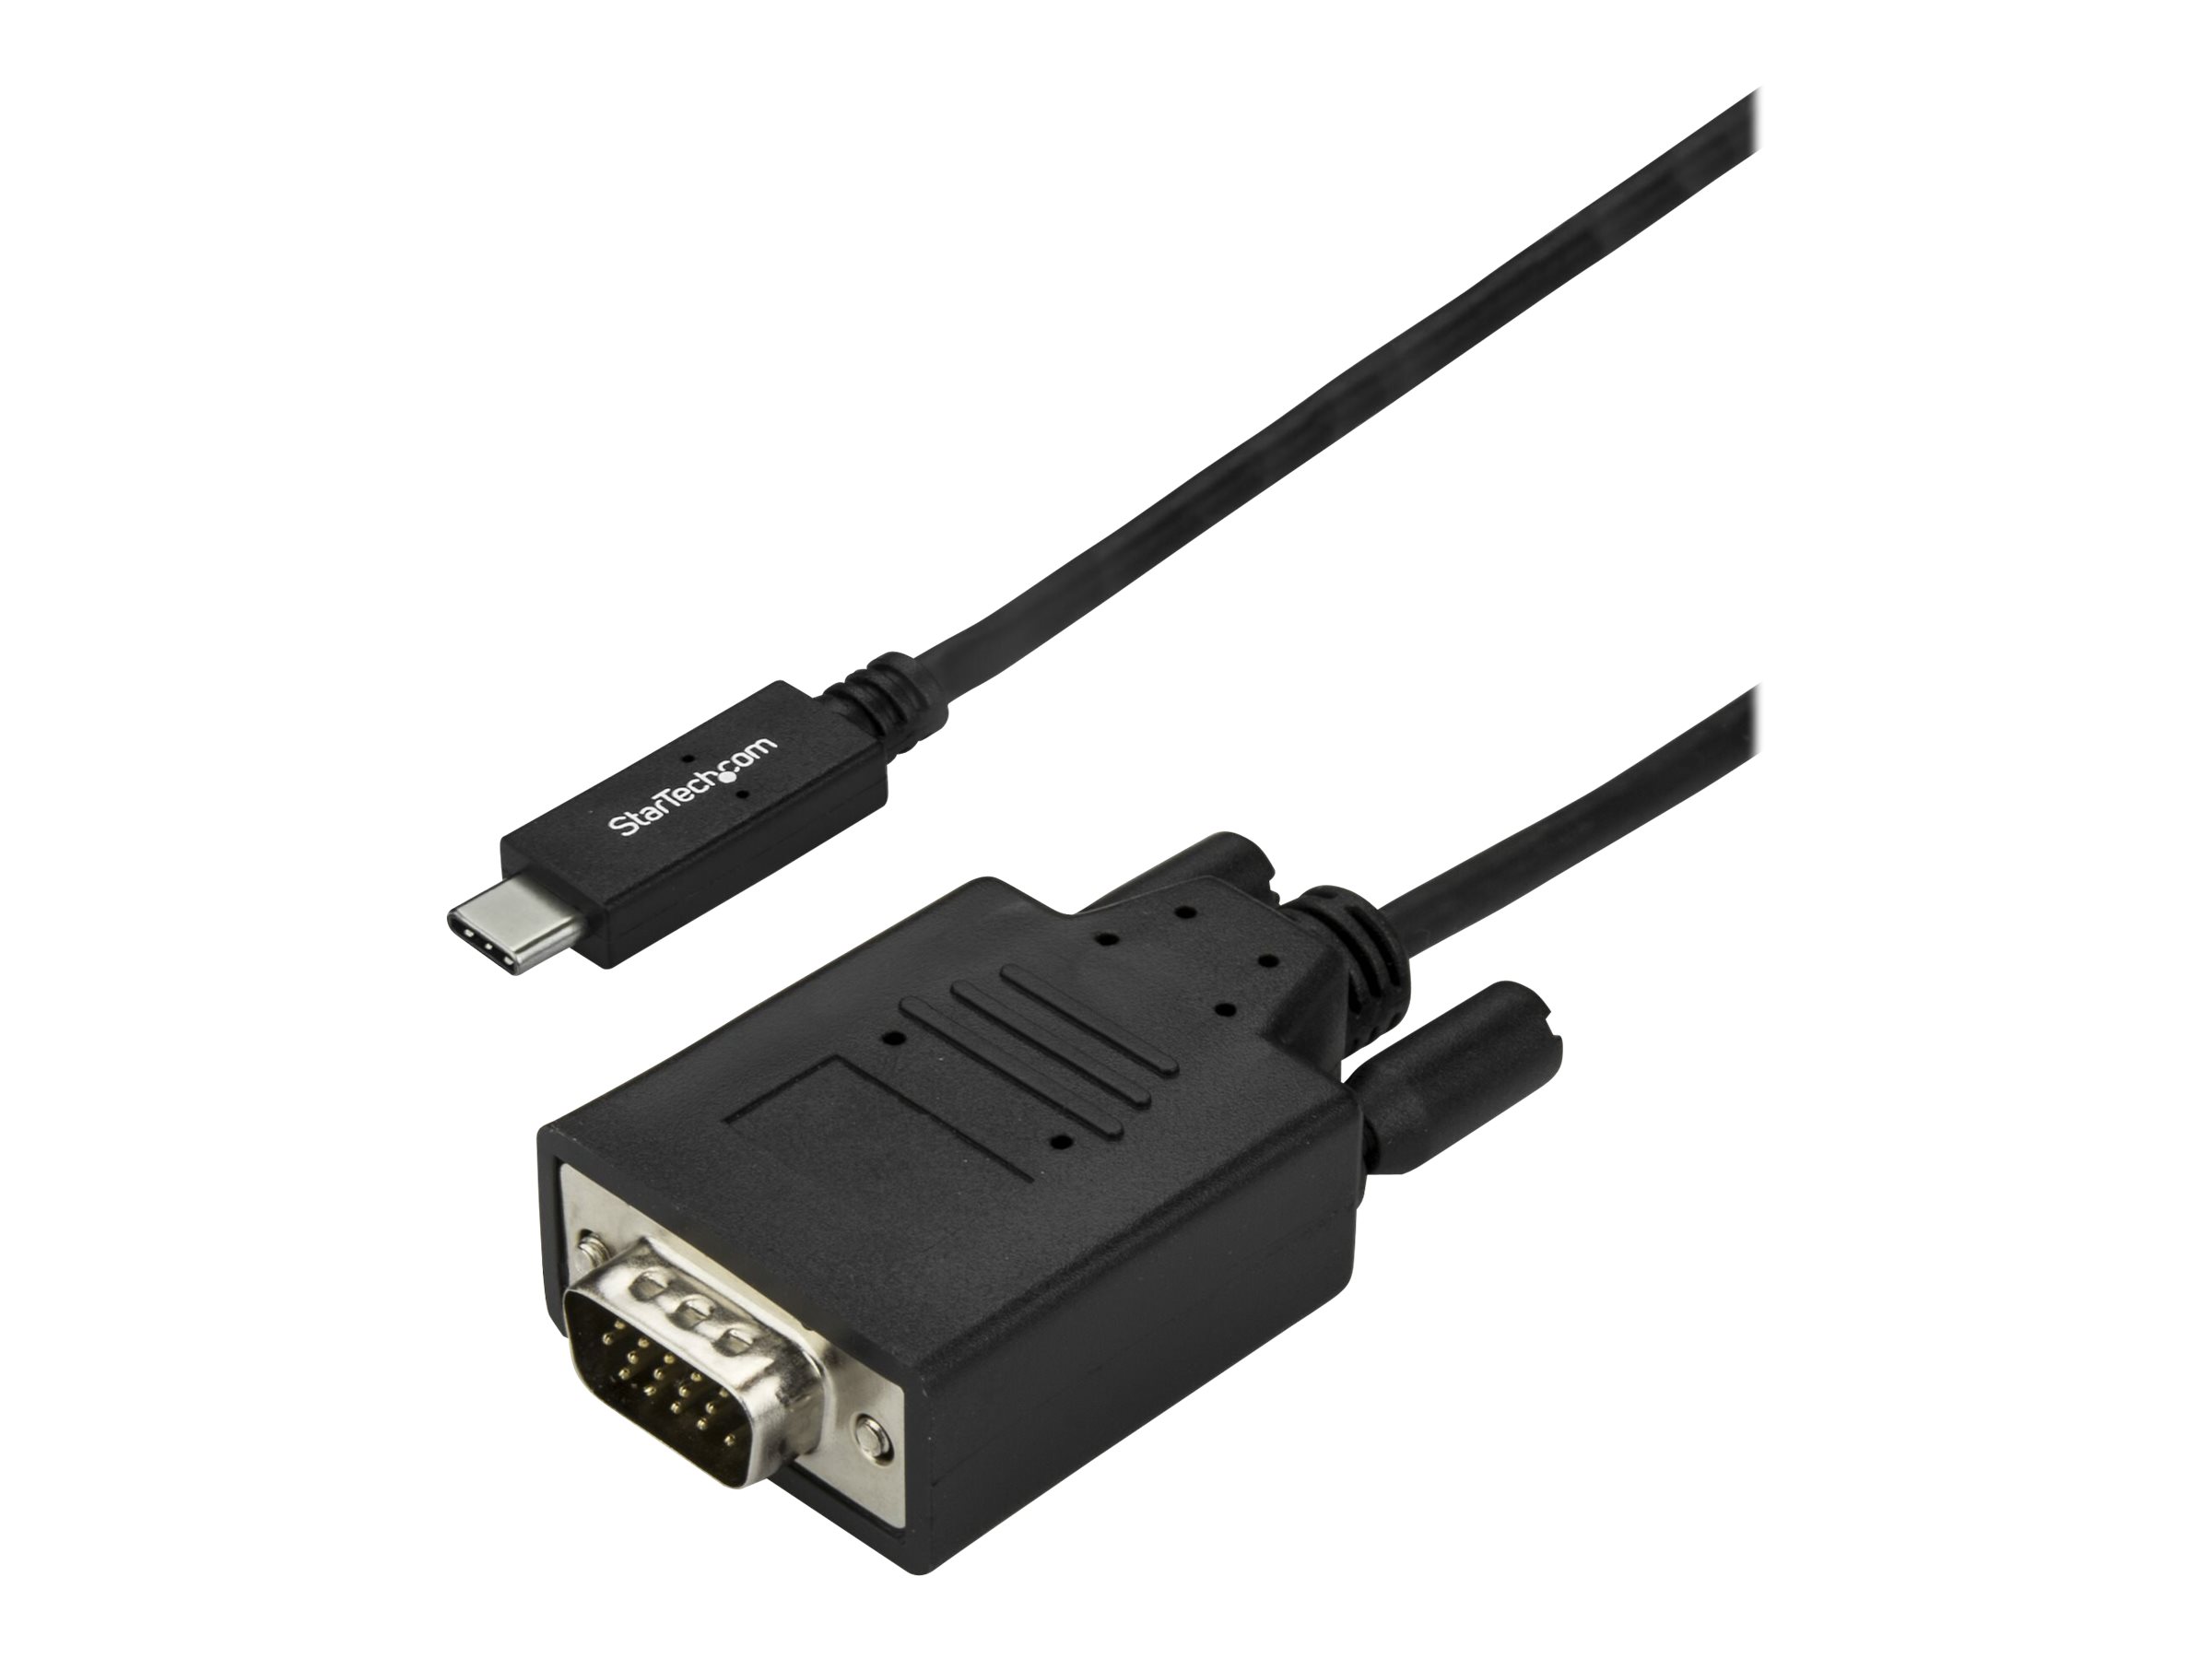 Spil deadline Rædsel StarTech.com 10ft/3m USB C to VGA Cable, 1920x1200/1080p USB Type C to VGA  Video Adapter Cable, Thunderbolt 3 Compatible, Laptop to VGA Monitor/ Projector, DP Alt Mode HBR2 Cable, Black | www.shidirect.com